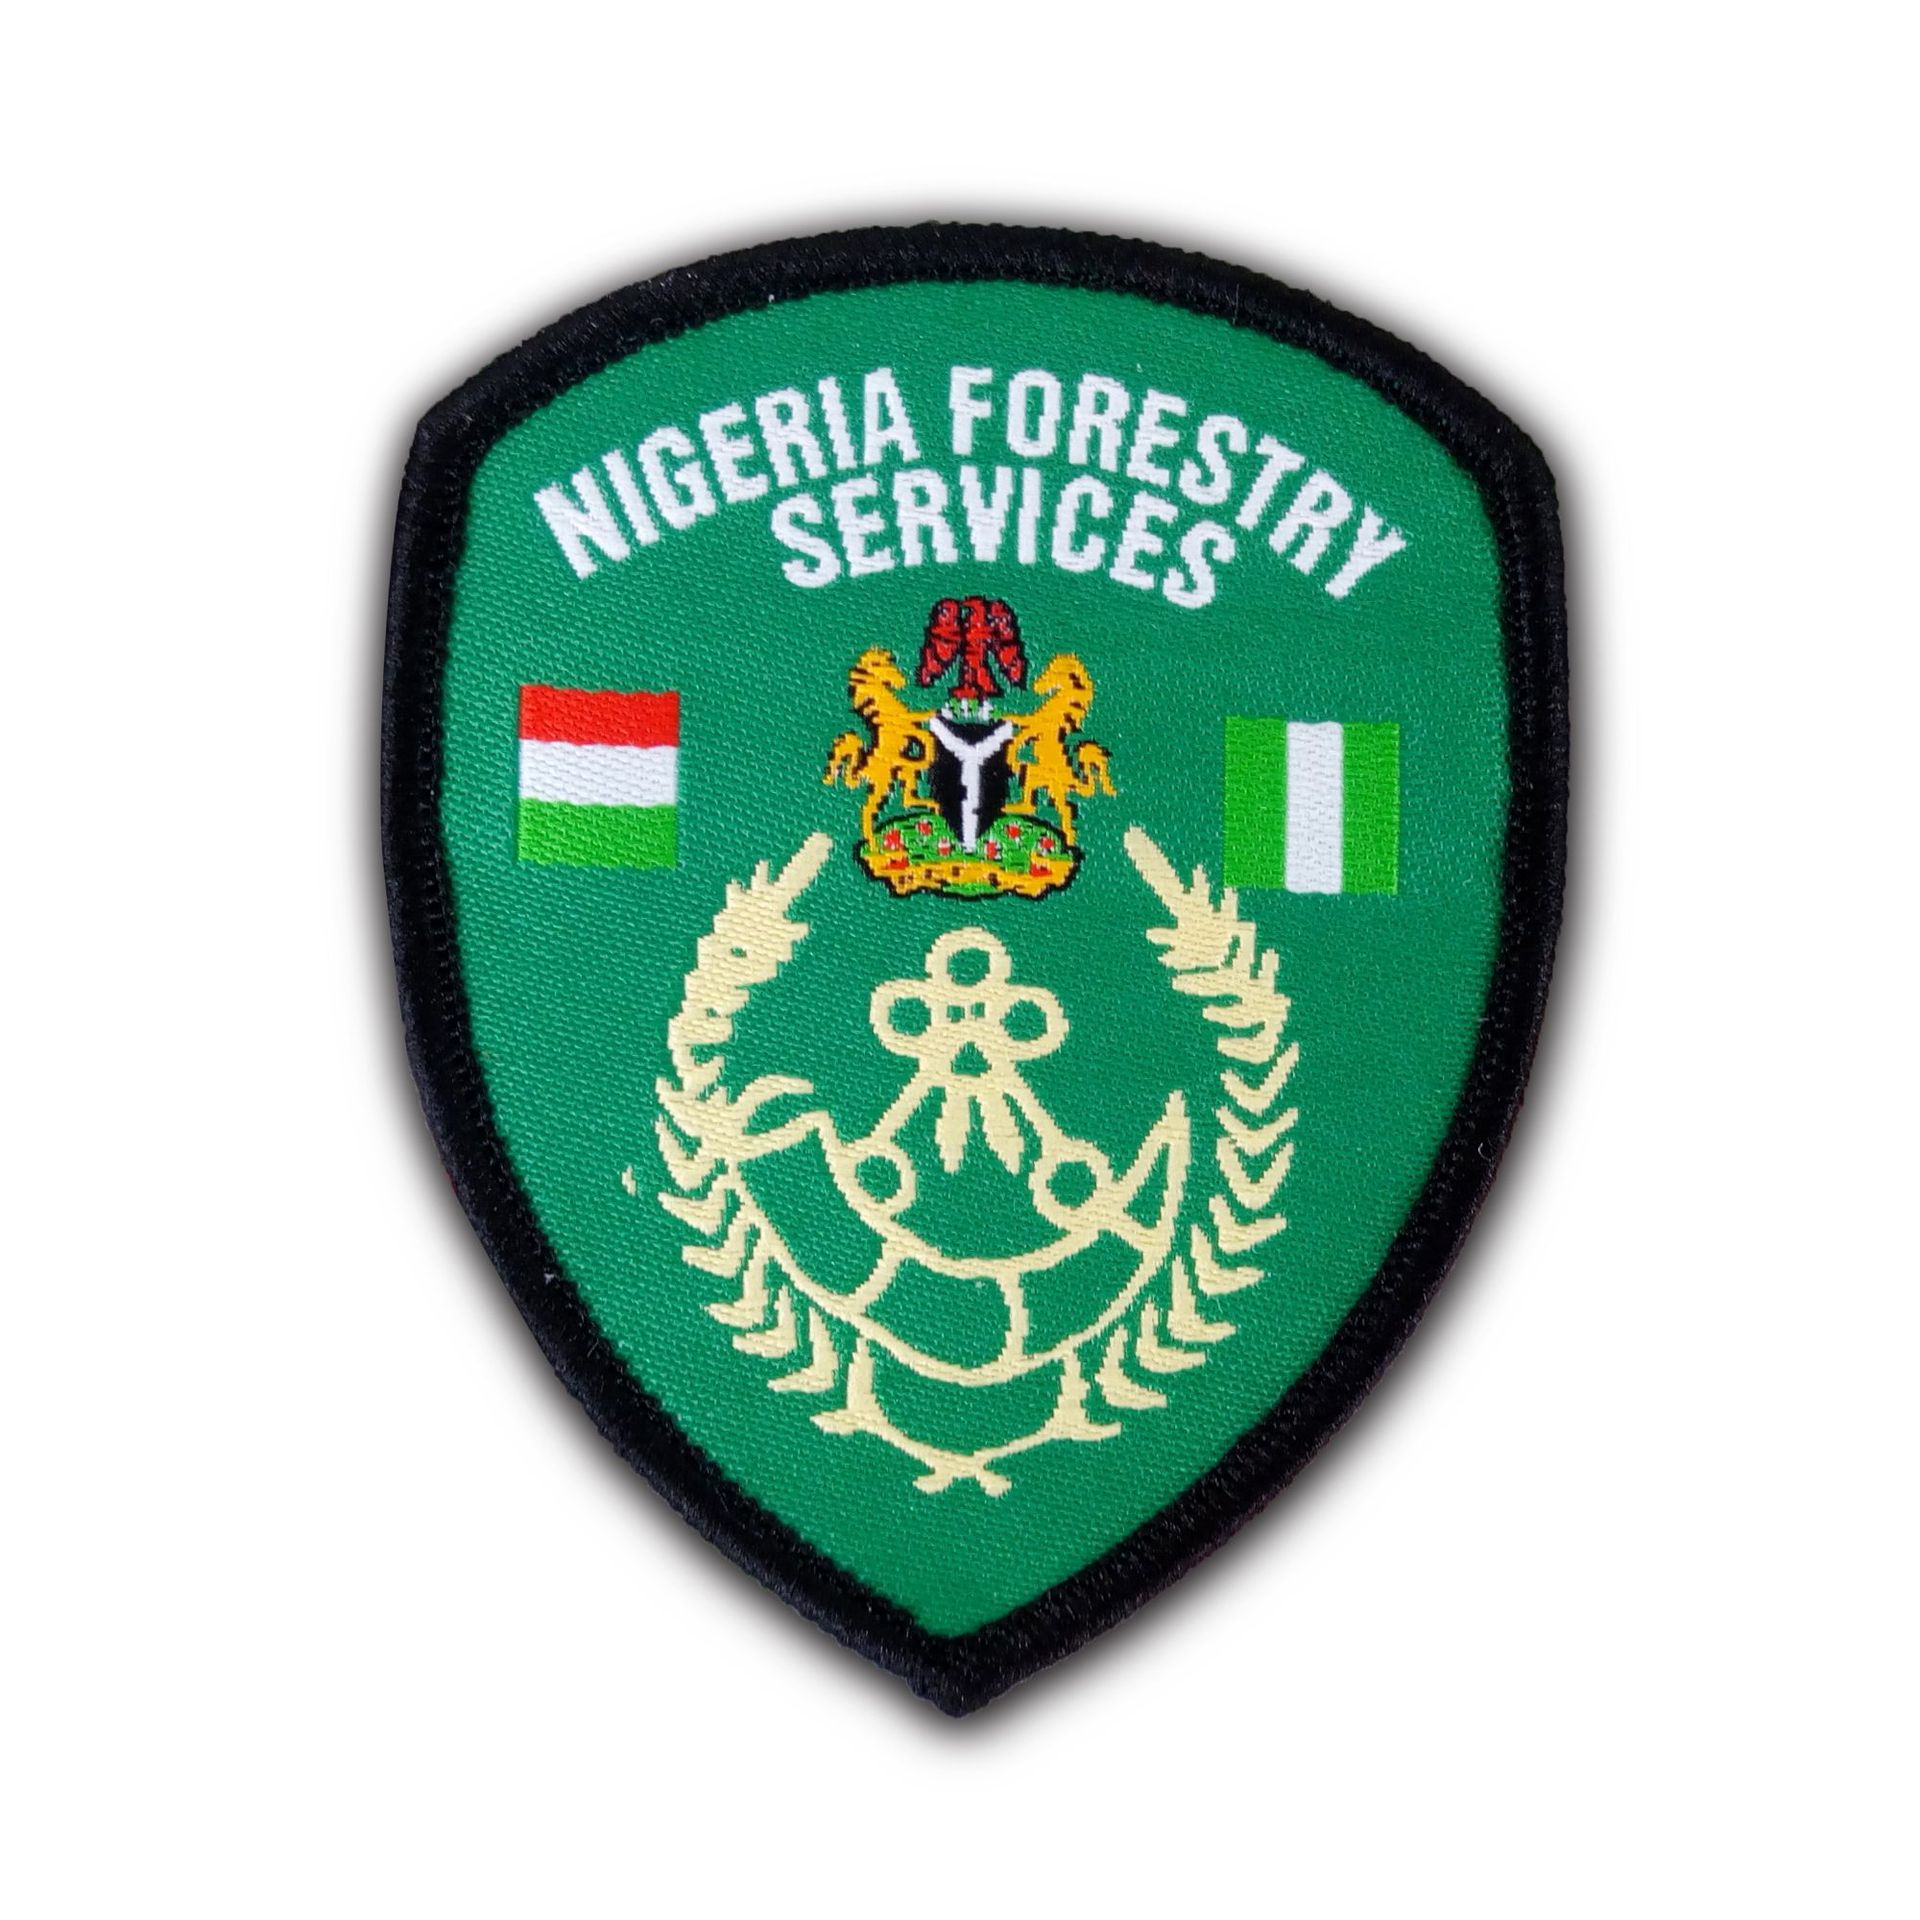 Nigeria forestry services patch